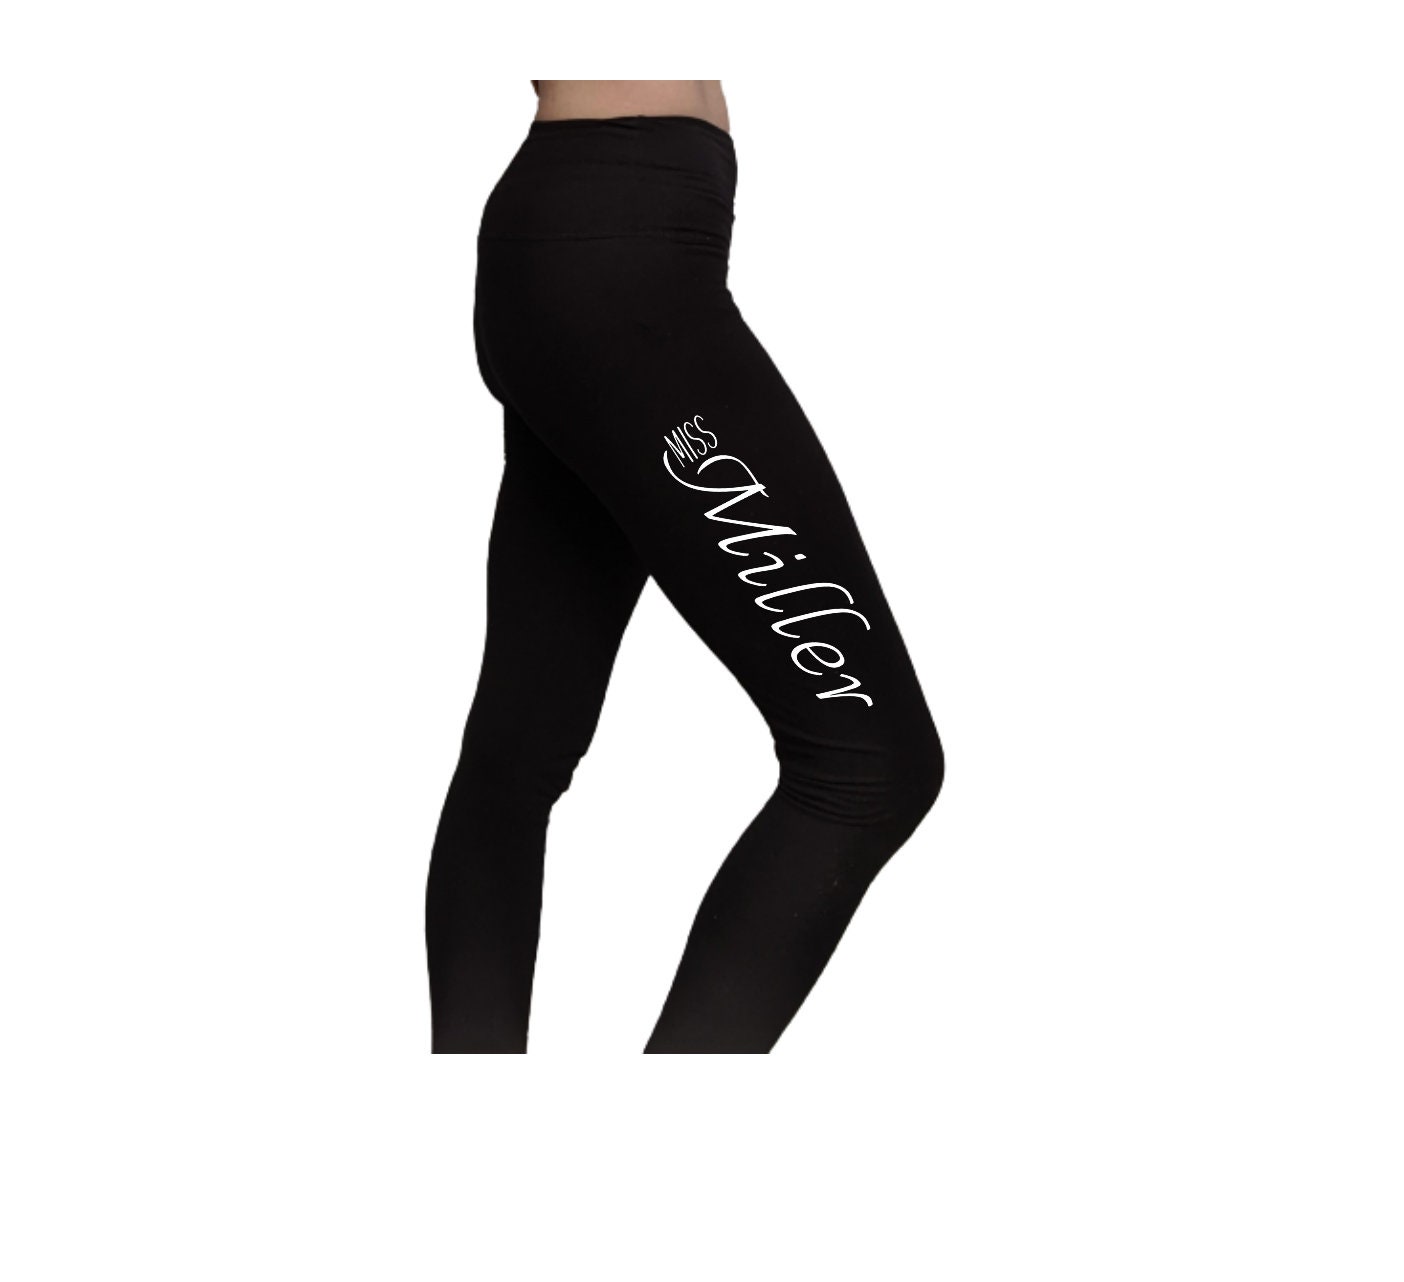 Personalized Name Leggings, Custom Text Leggings, Personalized Leggings  With Name, Personalized Leggings for Group or Team 